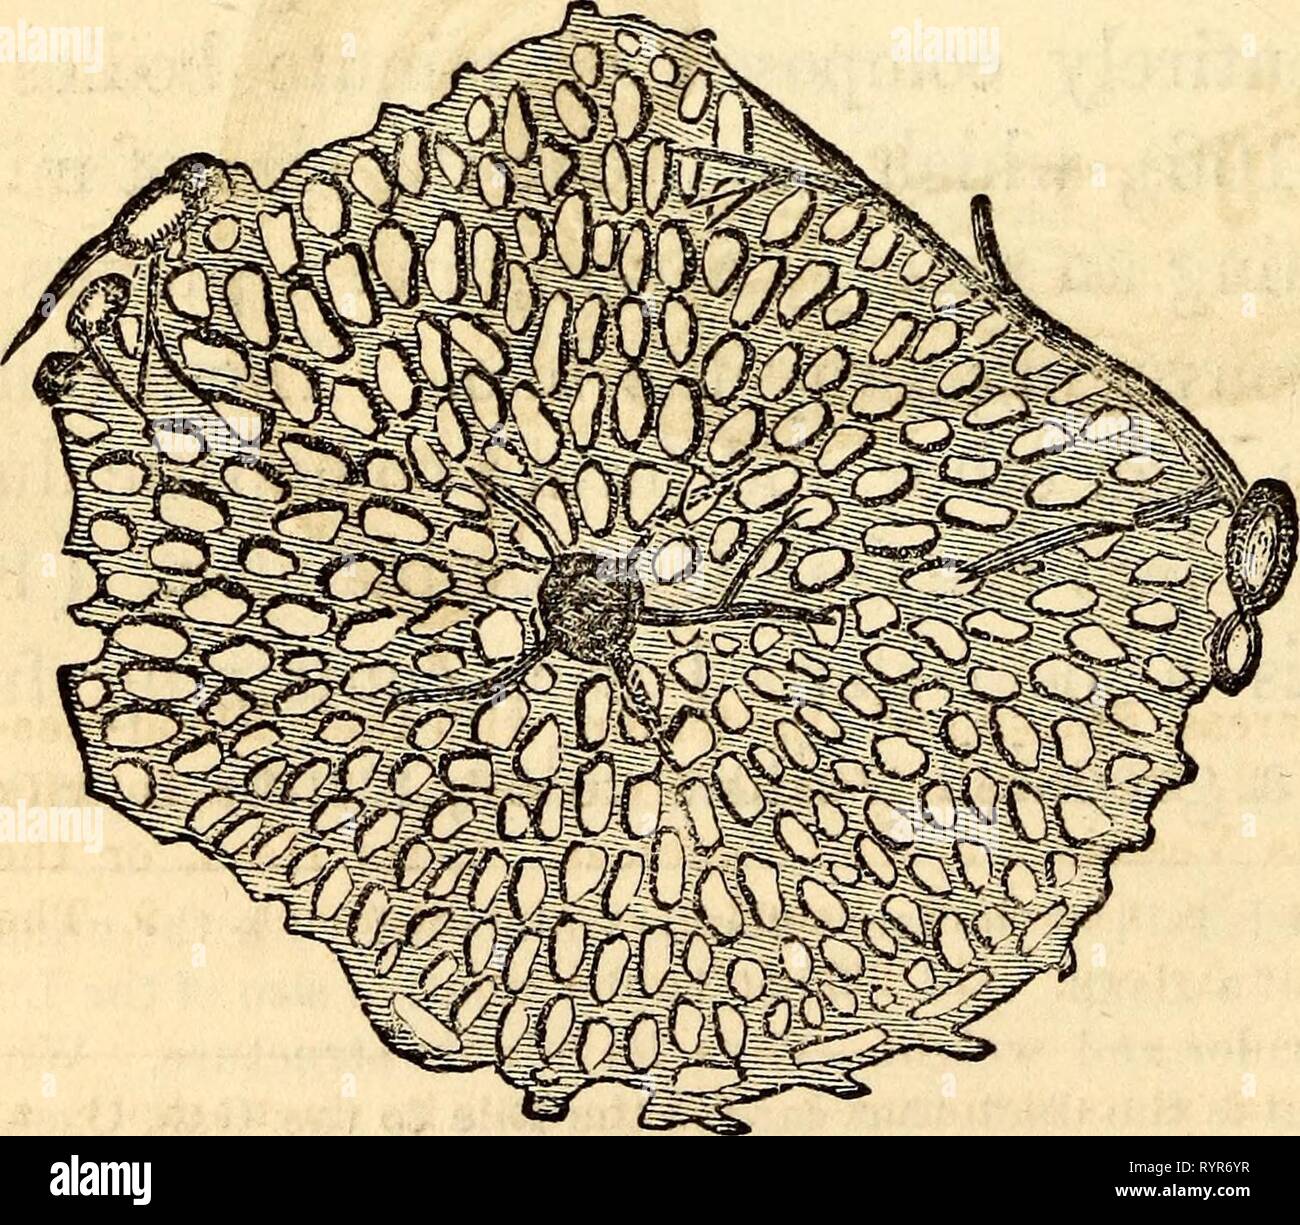 Elementary anatomy and physiology  Elementary anatomy and physiology : for colleges, academies, and other schools . elementaryanato00hitc Year: 1869  The Inferior or Concave Surface of the Liver, showing its Subdivisions into Lobes. I, Center of the Light Lobe. 2, Center of the Left Lobe. 3, Its Anterior, Inferior, or Thin Margin. 4, Its Posterior, Thick or Diaphragmatic Portion. 5, The Light Extrem- ity. 6, The Left Extremity. 7, The Notch on the Anterior Margin. 8, The Umbilical or Longitudinal Fissure. 9, The Hound Ligament or remains of the Umbilical Vein. 10, The Portion of the Suspensory Stock Photo